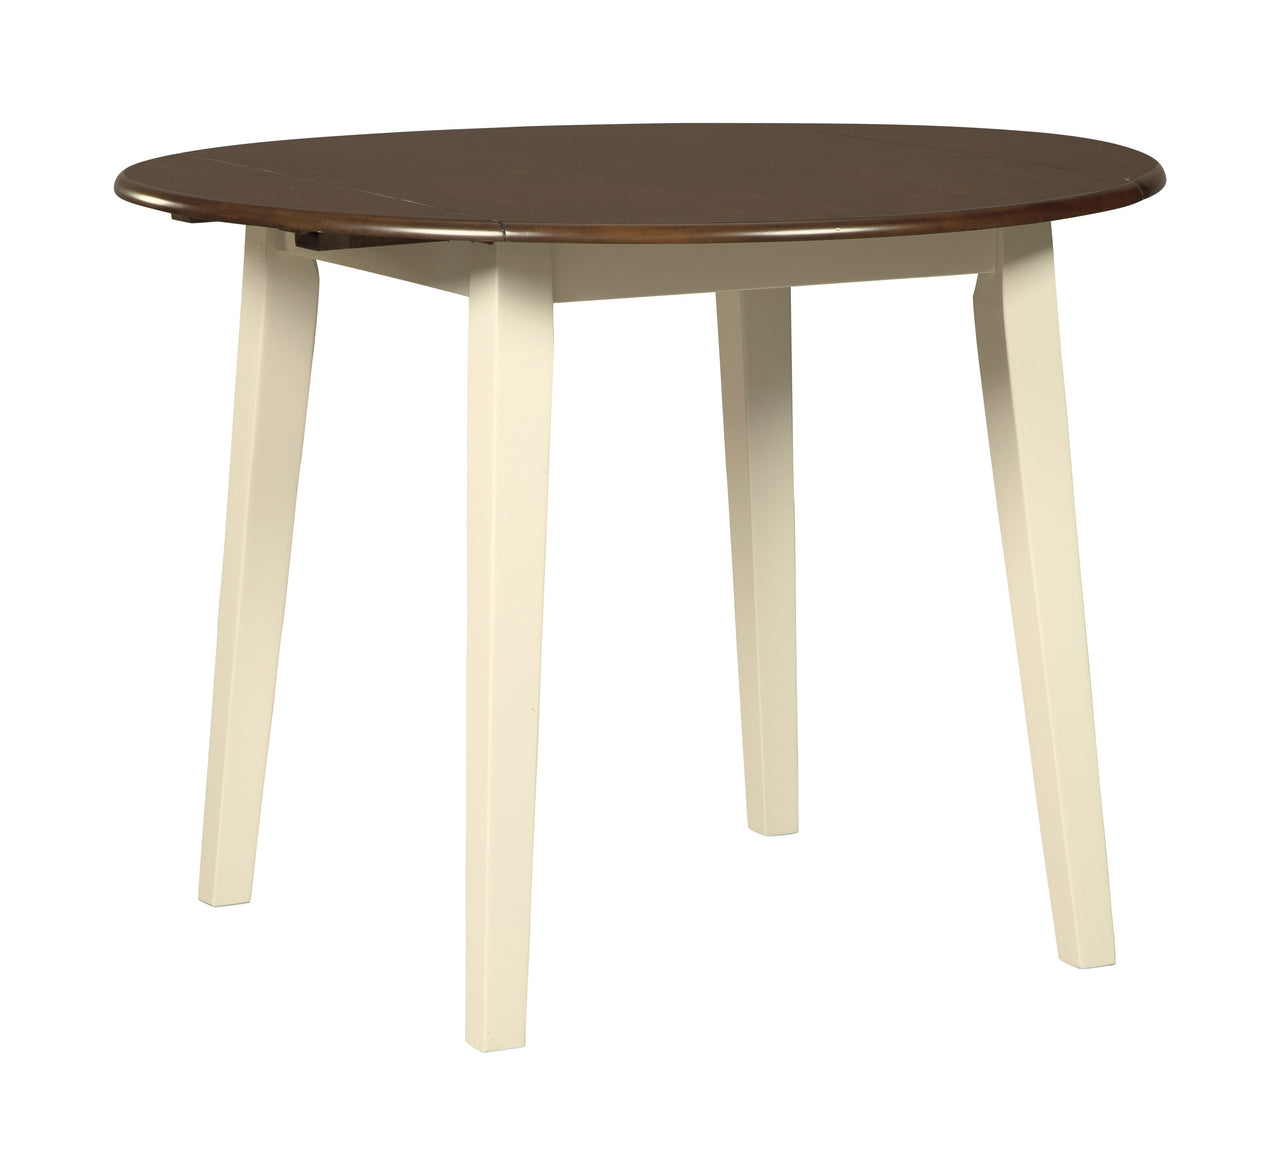 Woodanville - Cream / Brown - Round Drm Drop Leaf Table - Tony's Home Furnishings